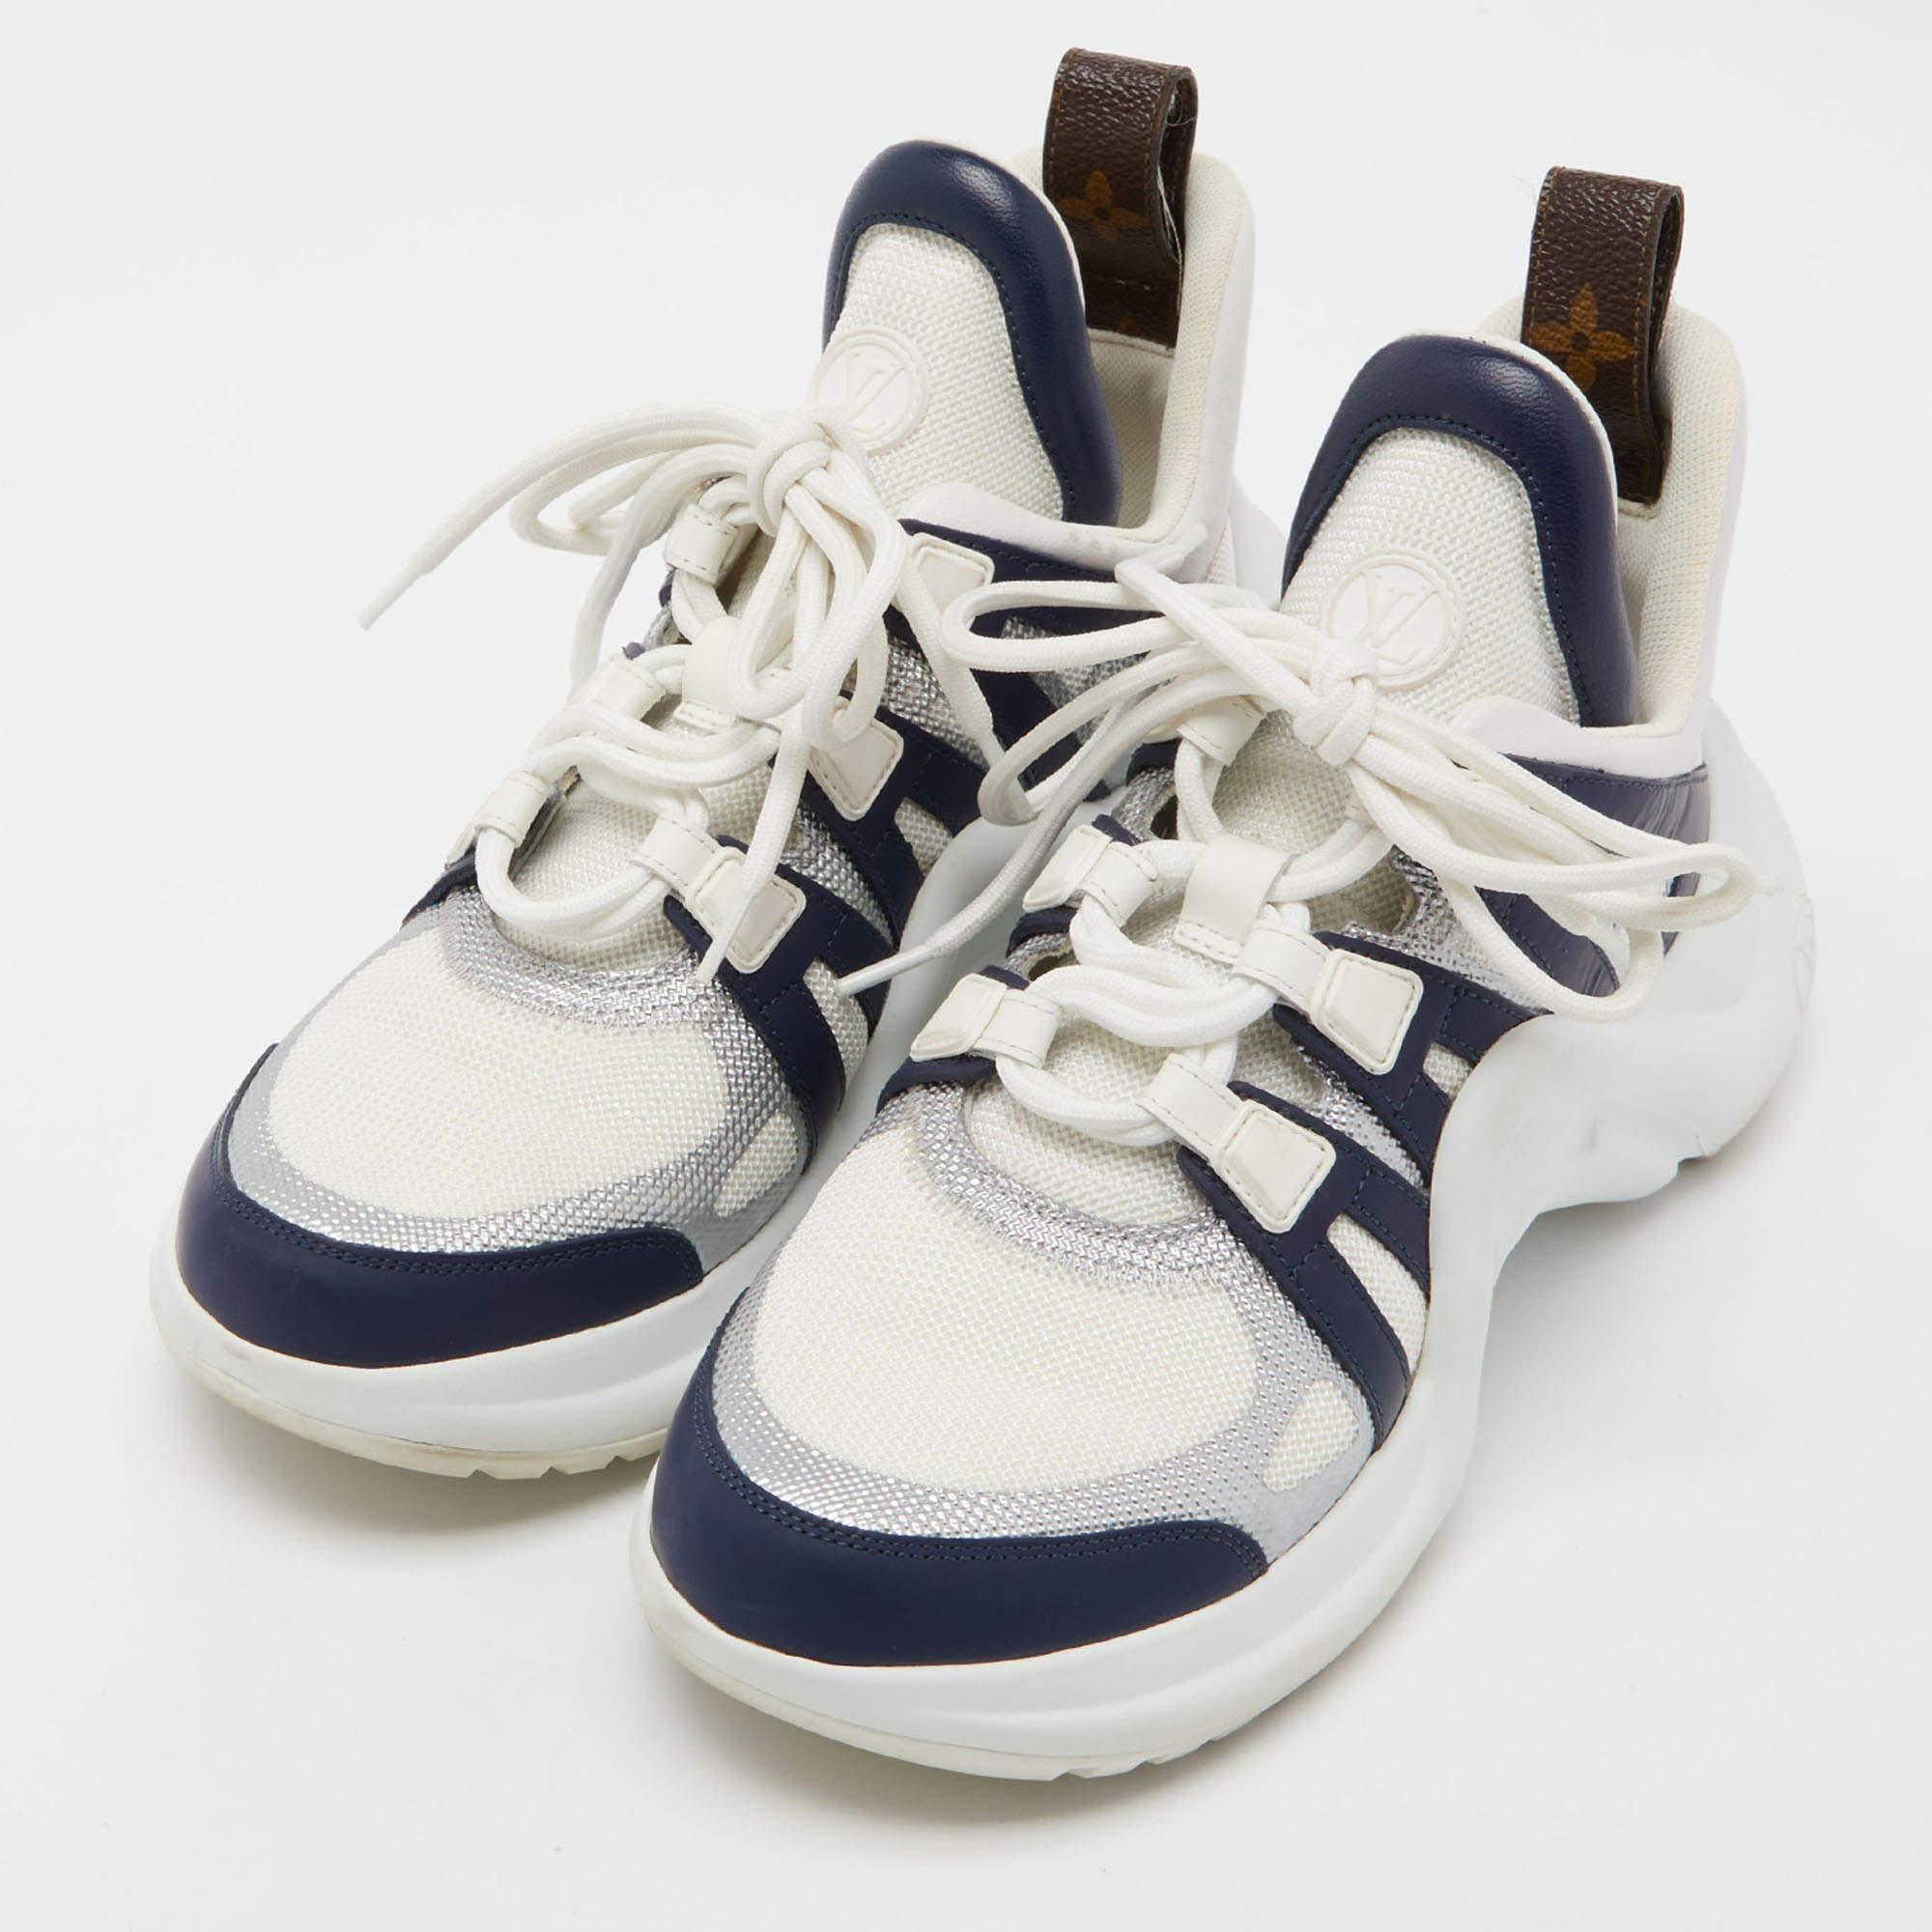 Give your outfit a luxe update with this pair of authentic Louis Vuitton sneakers. The shoes are sewn perfectly to help you make a statement in them for a long time.

